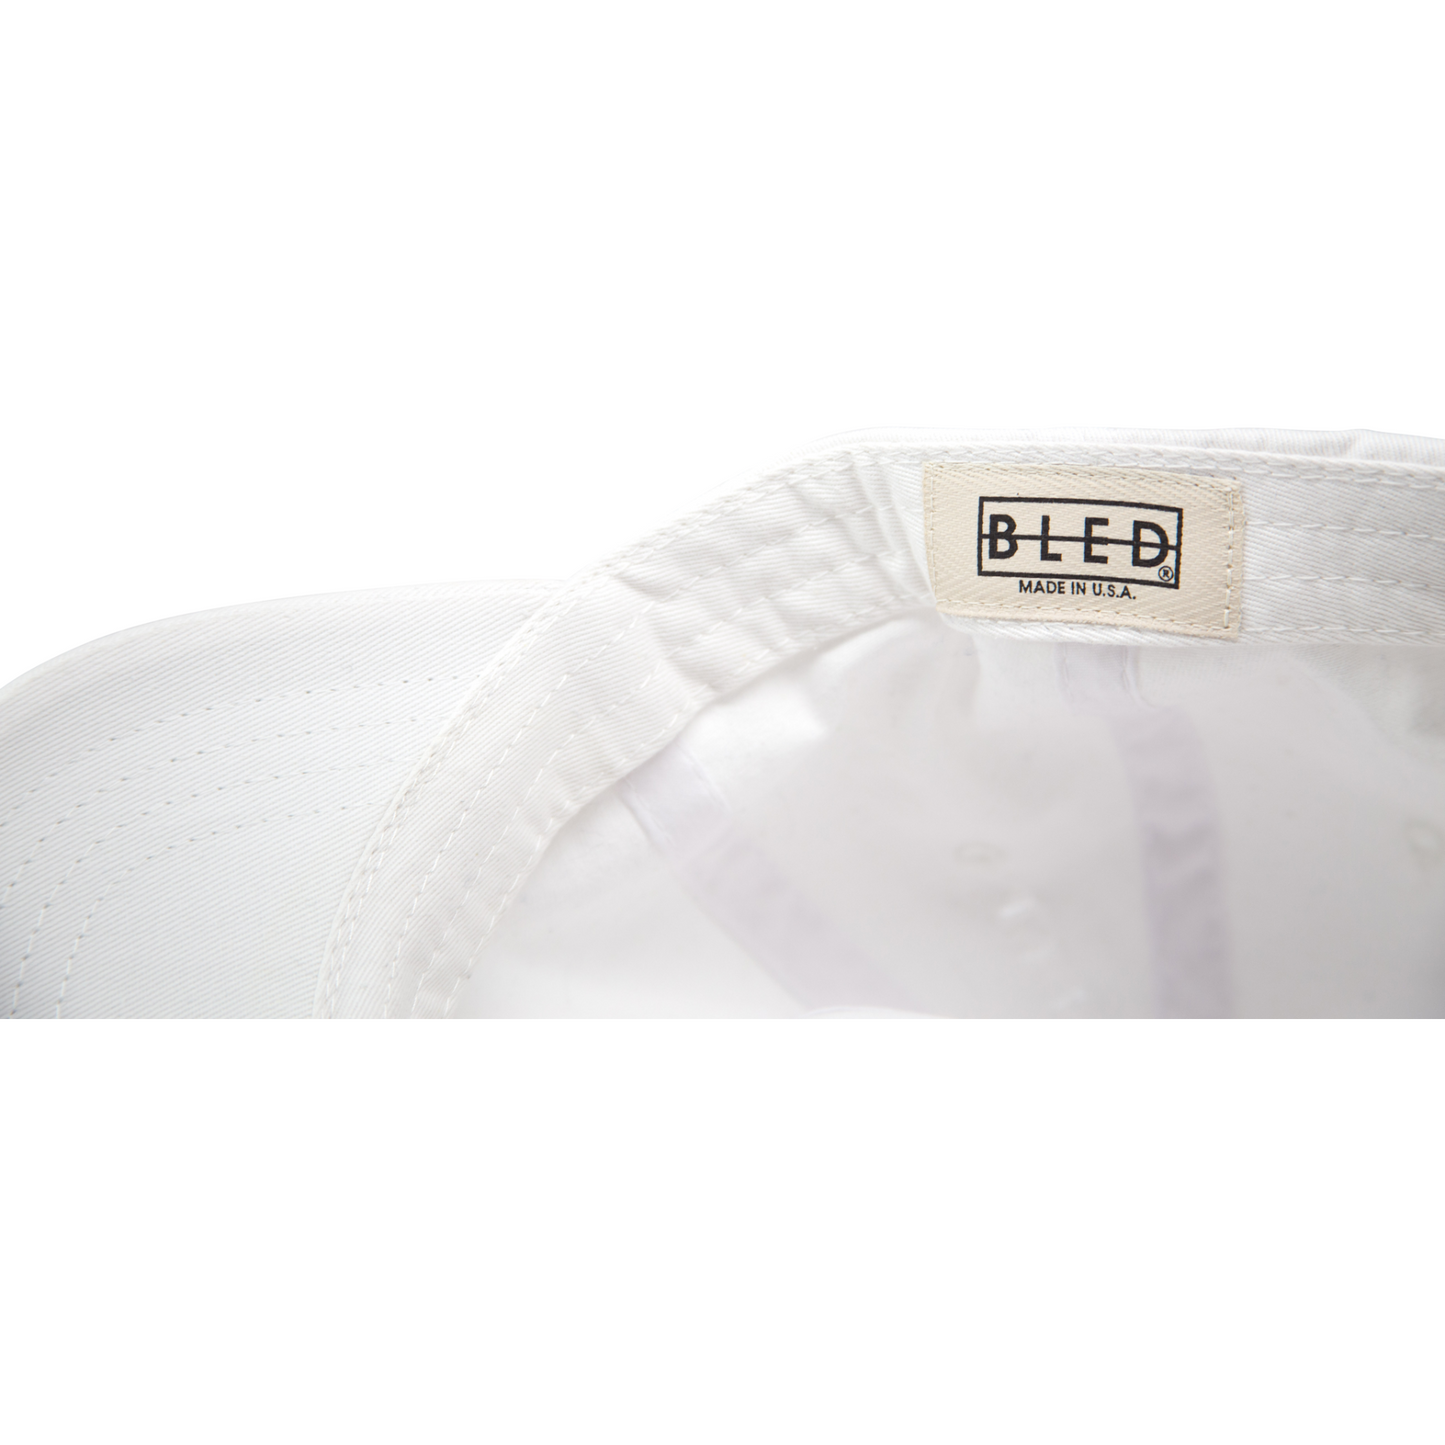 6-panel unconstructed 100% Cotton white dad hat featuring Levels design embroidery on the front and Bled logo embroidered on the back with adjustable strap closure.